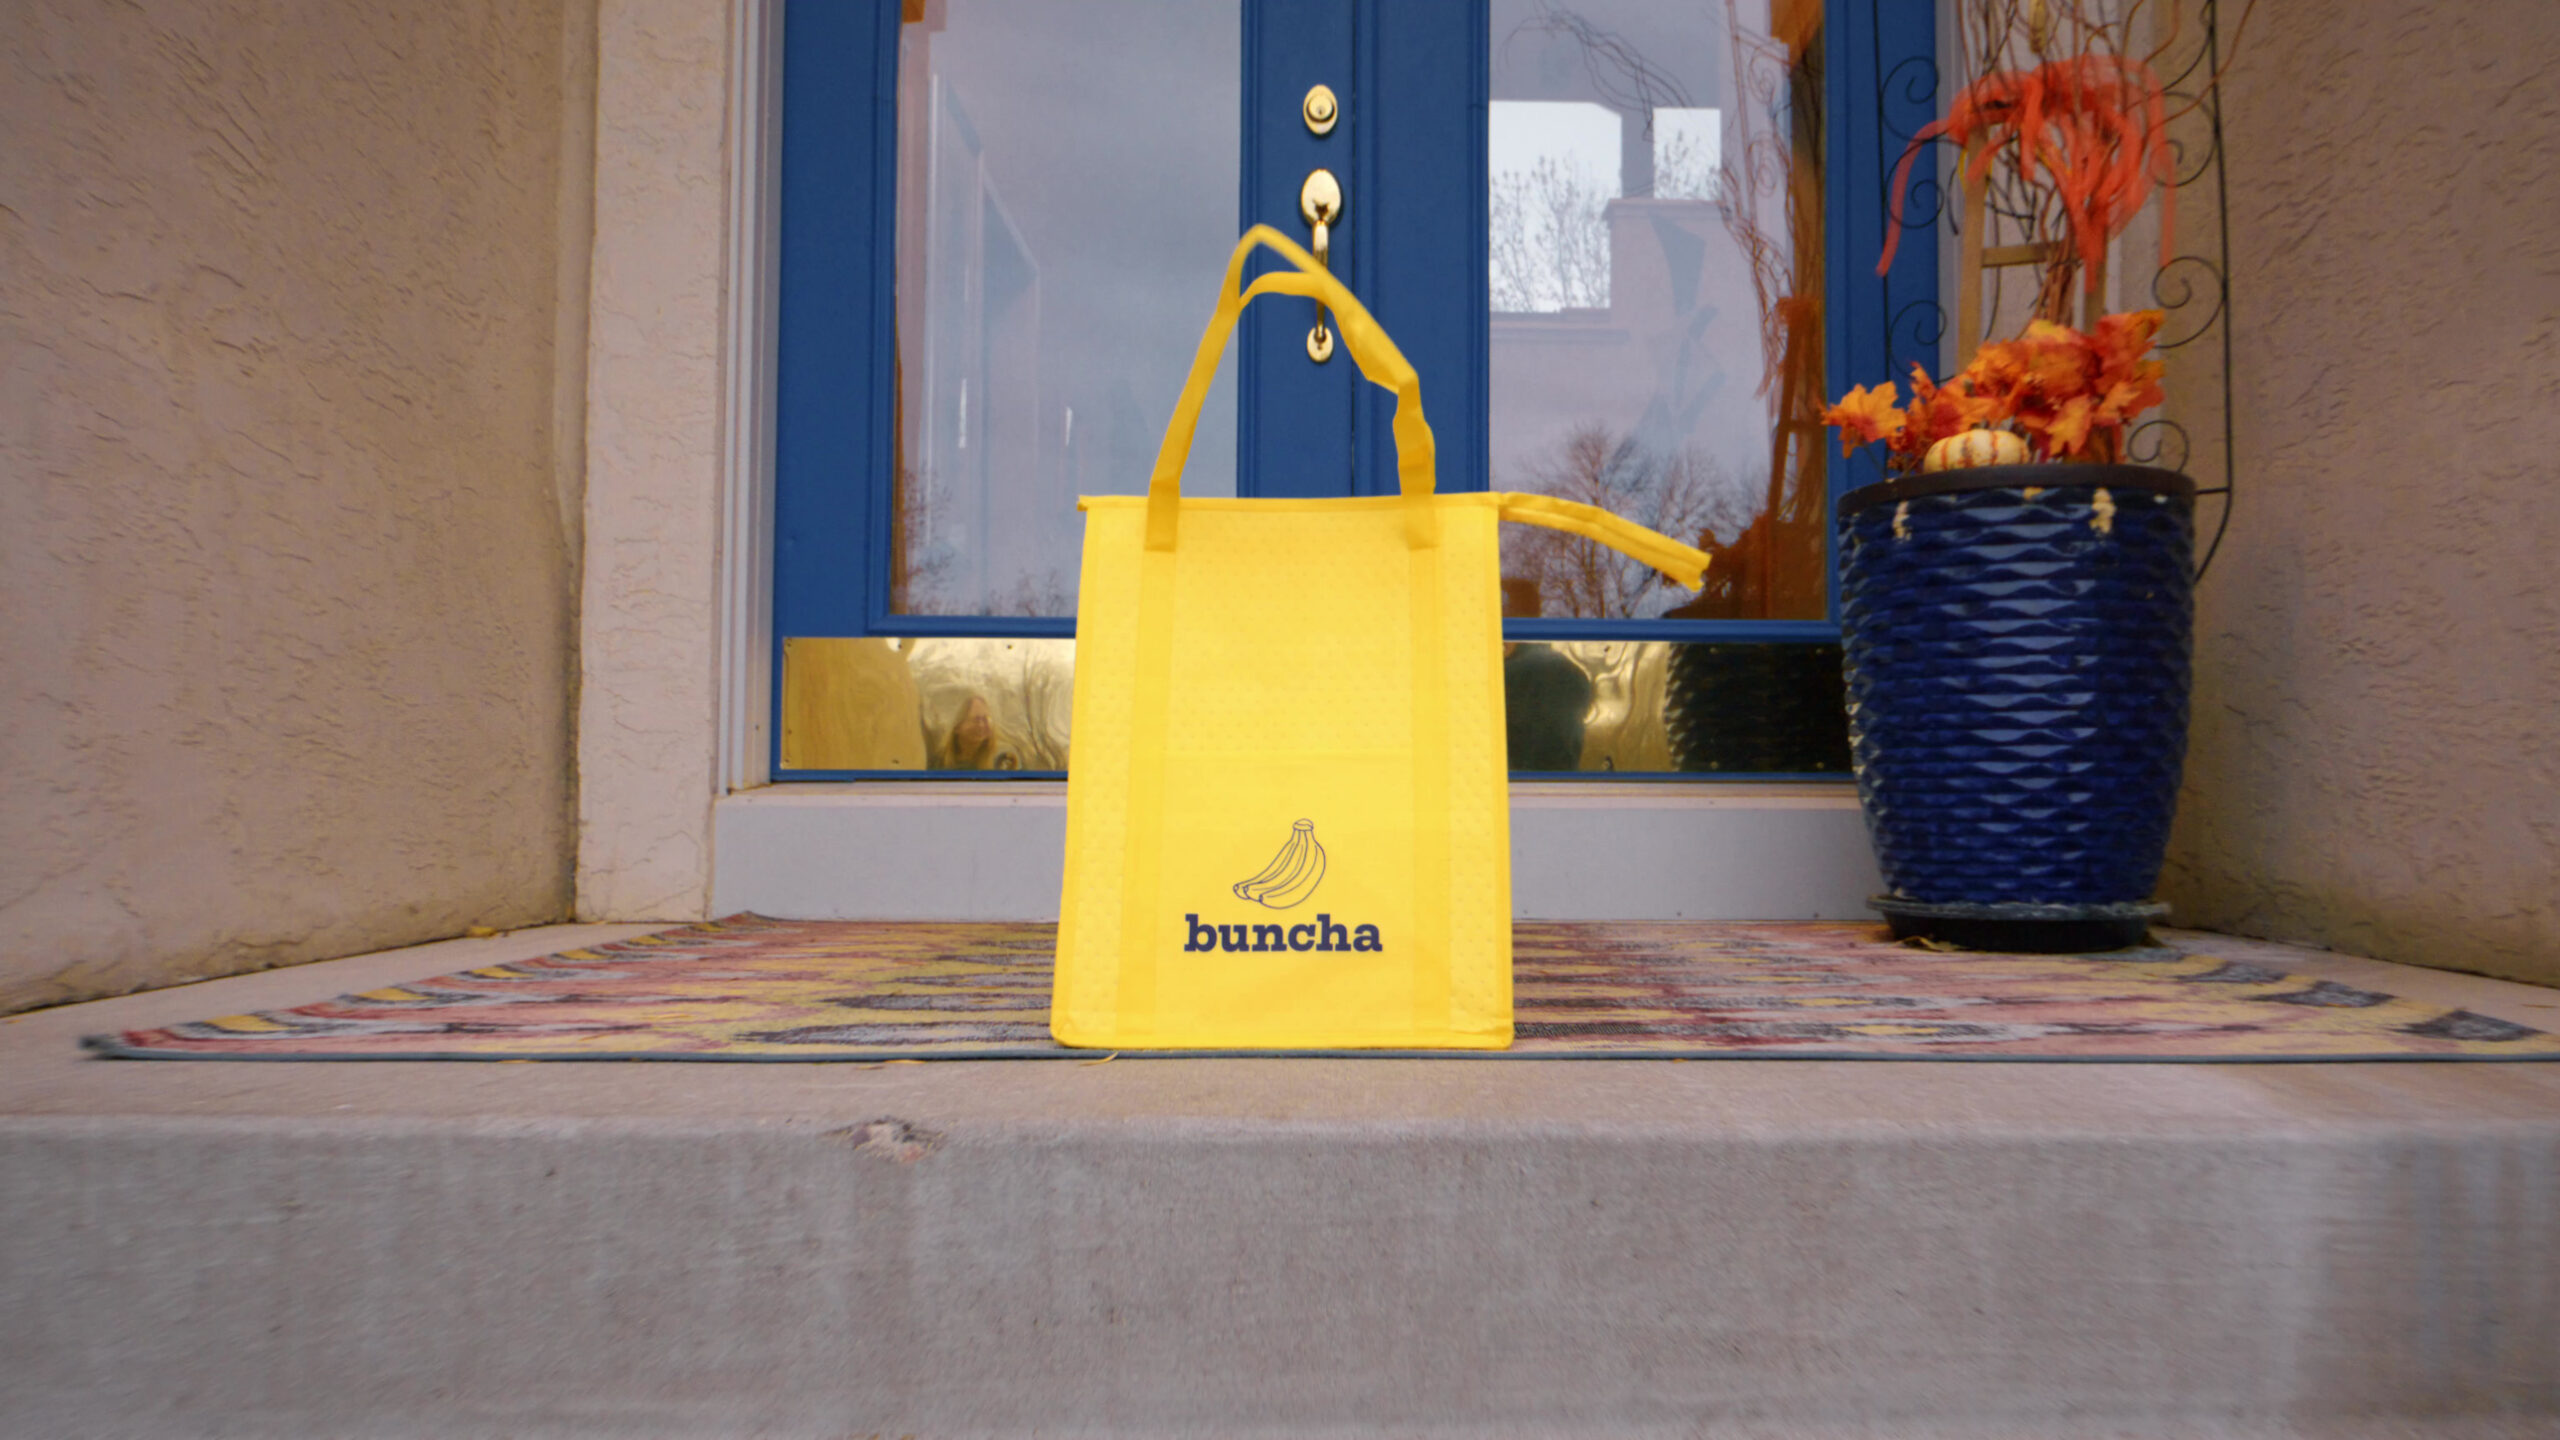 Introducing Buncha: Grocery Delivery for $1.45